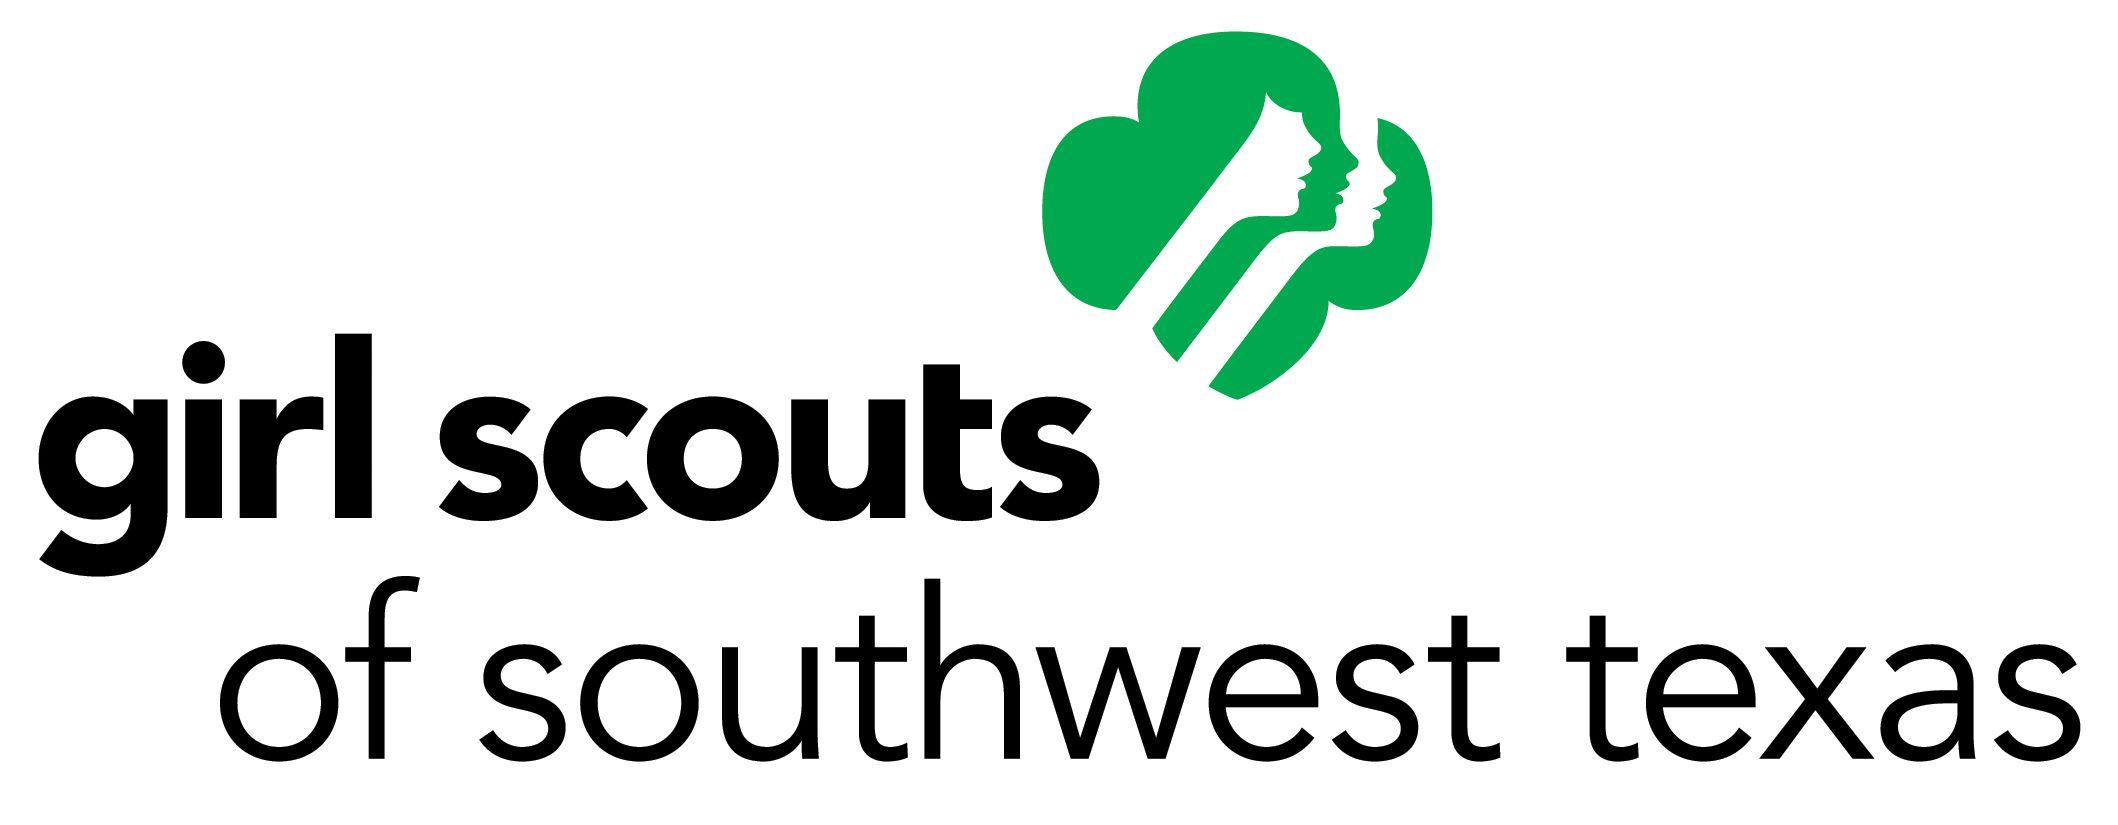 Girl Scout Camp Logo - Summer's almost here! Have you registered for Girl Scout camp